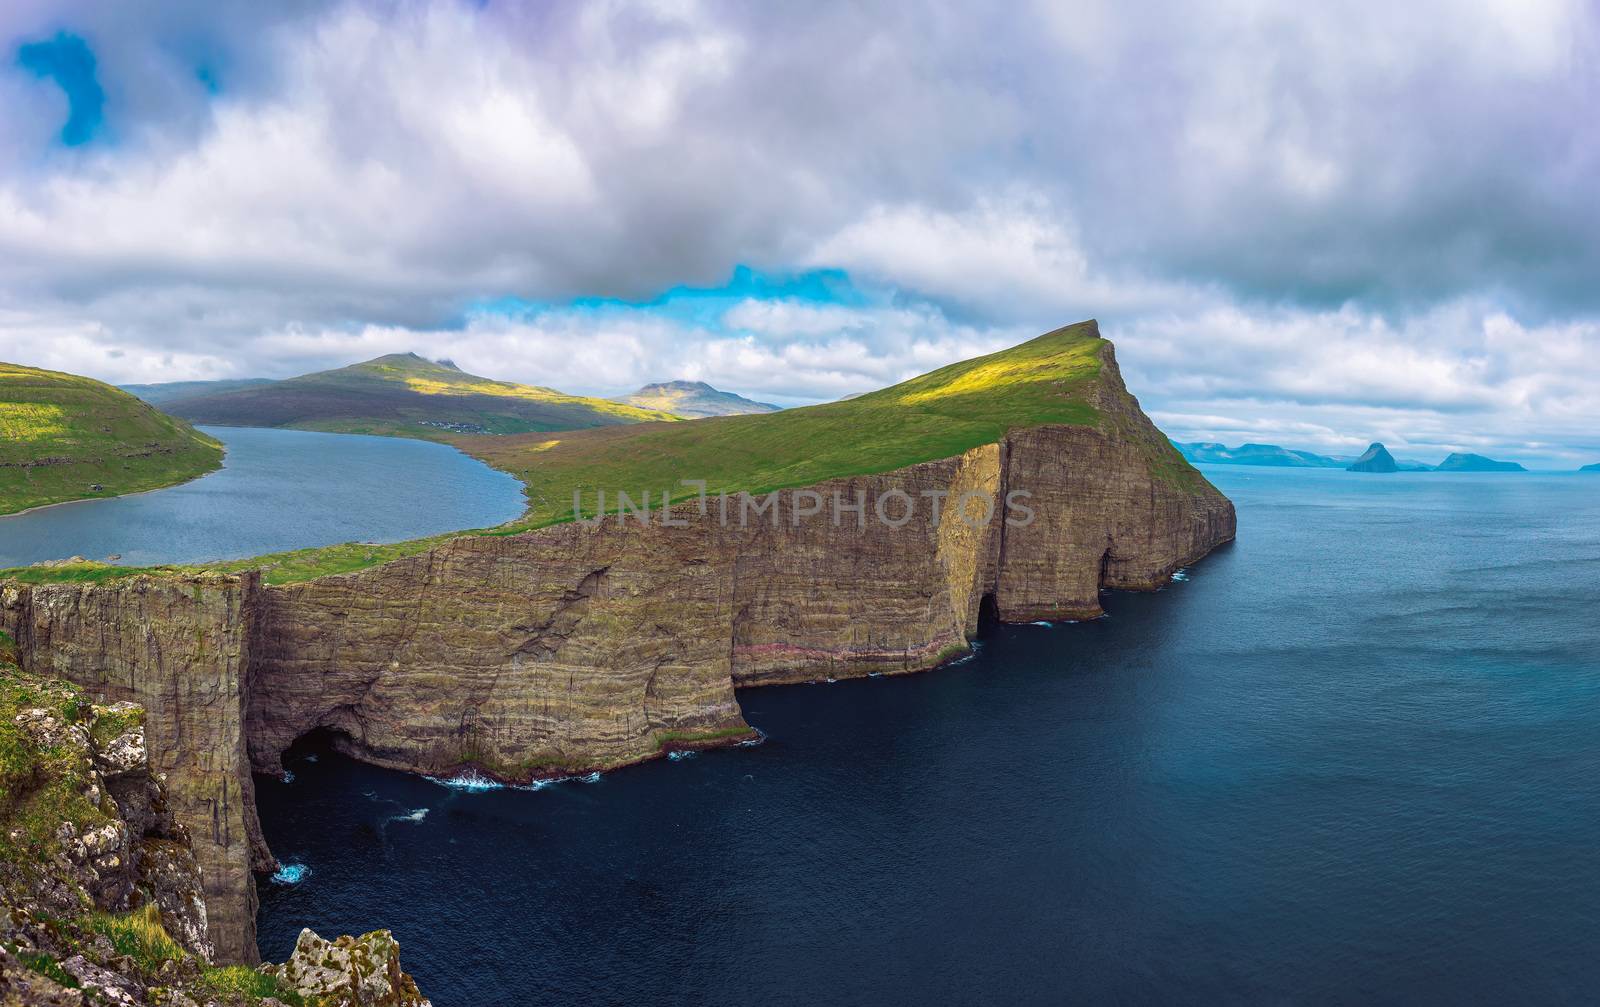 Panorama of the cliff Traelanipan and lake Sorvagsvatn located on the island of Vagar. Leitisvatn or Sorvagsvatn is the largest lake in the Faroe Islands, Denmark.